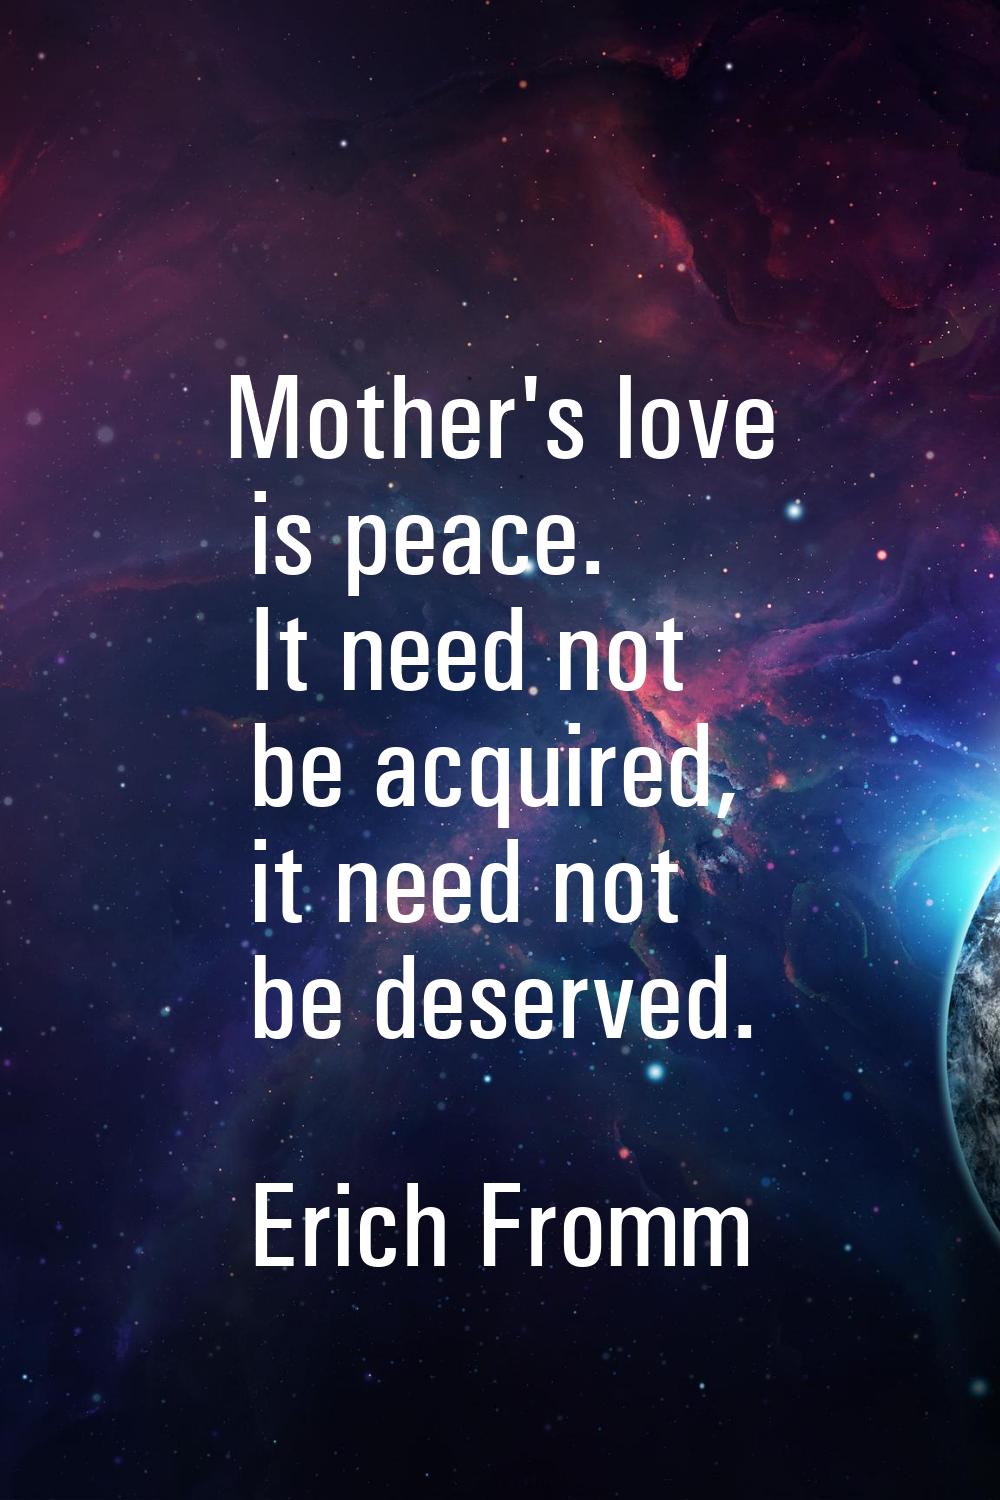 Mother's love is peace. It need not be acquired, it need not be deserved.